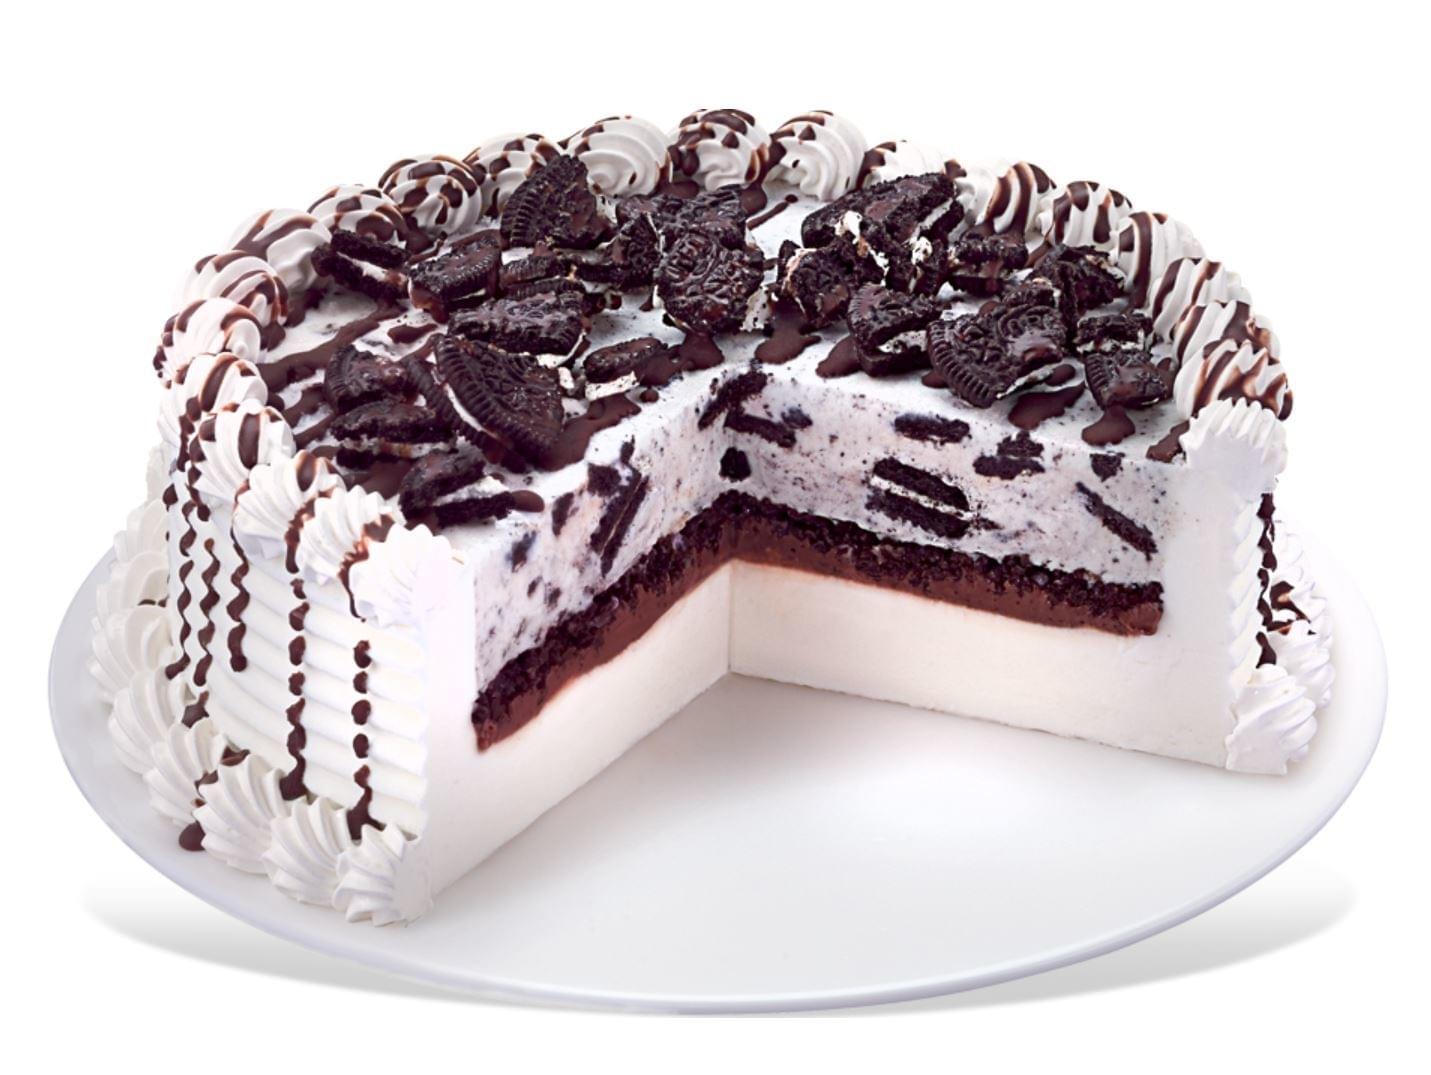 Dairy Queen 8 inch Oreo Blizzard Cake Nutrition Facts